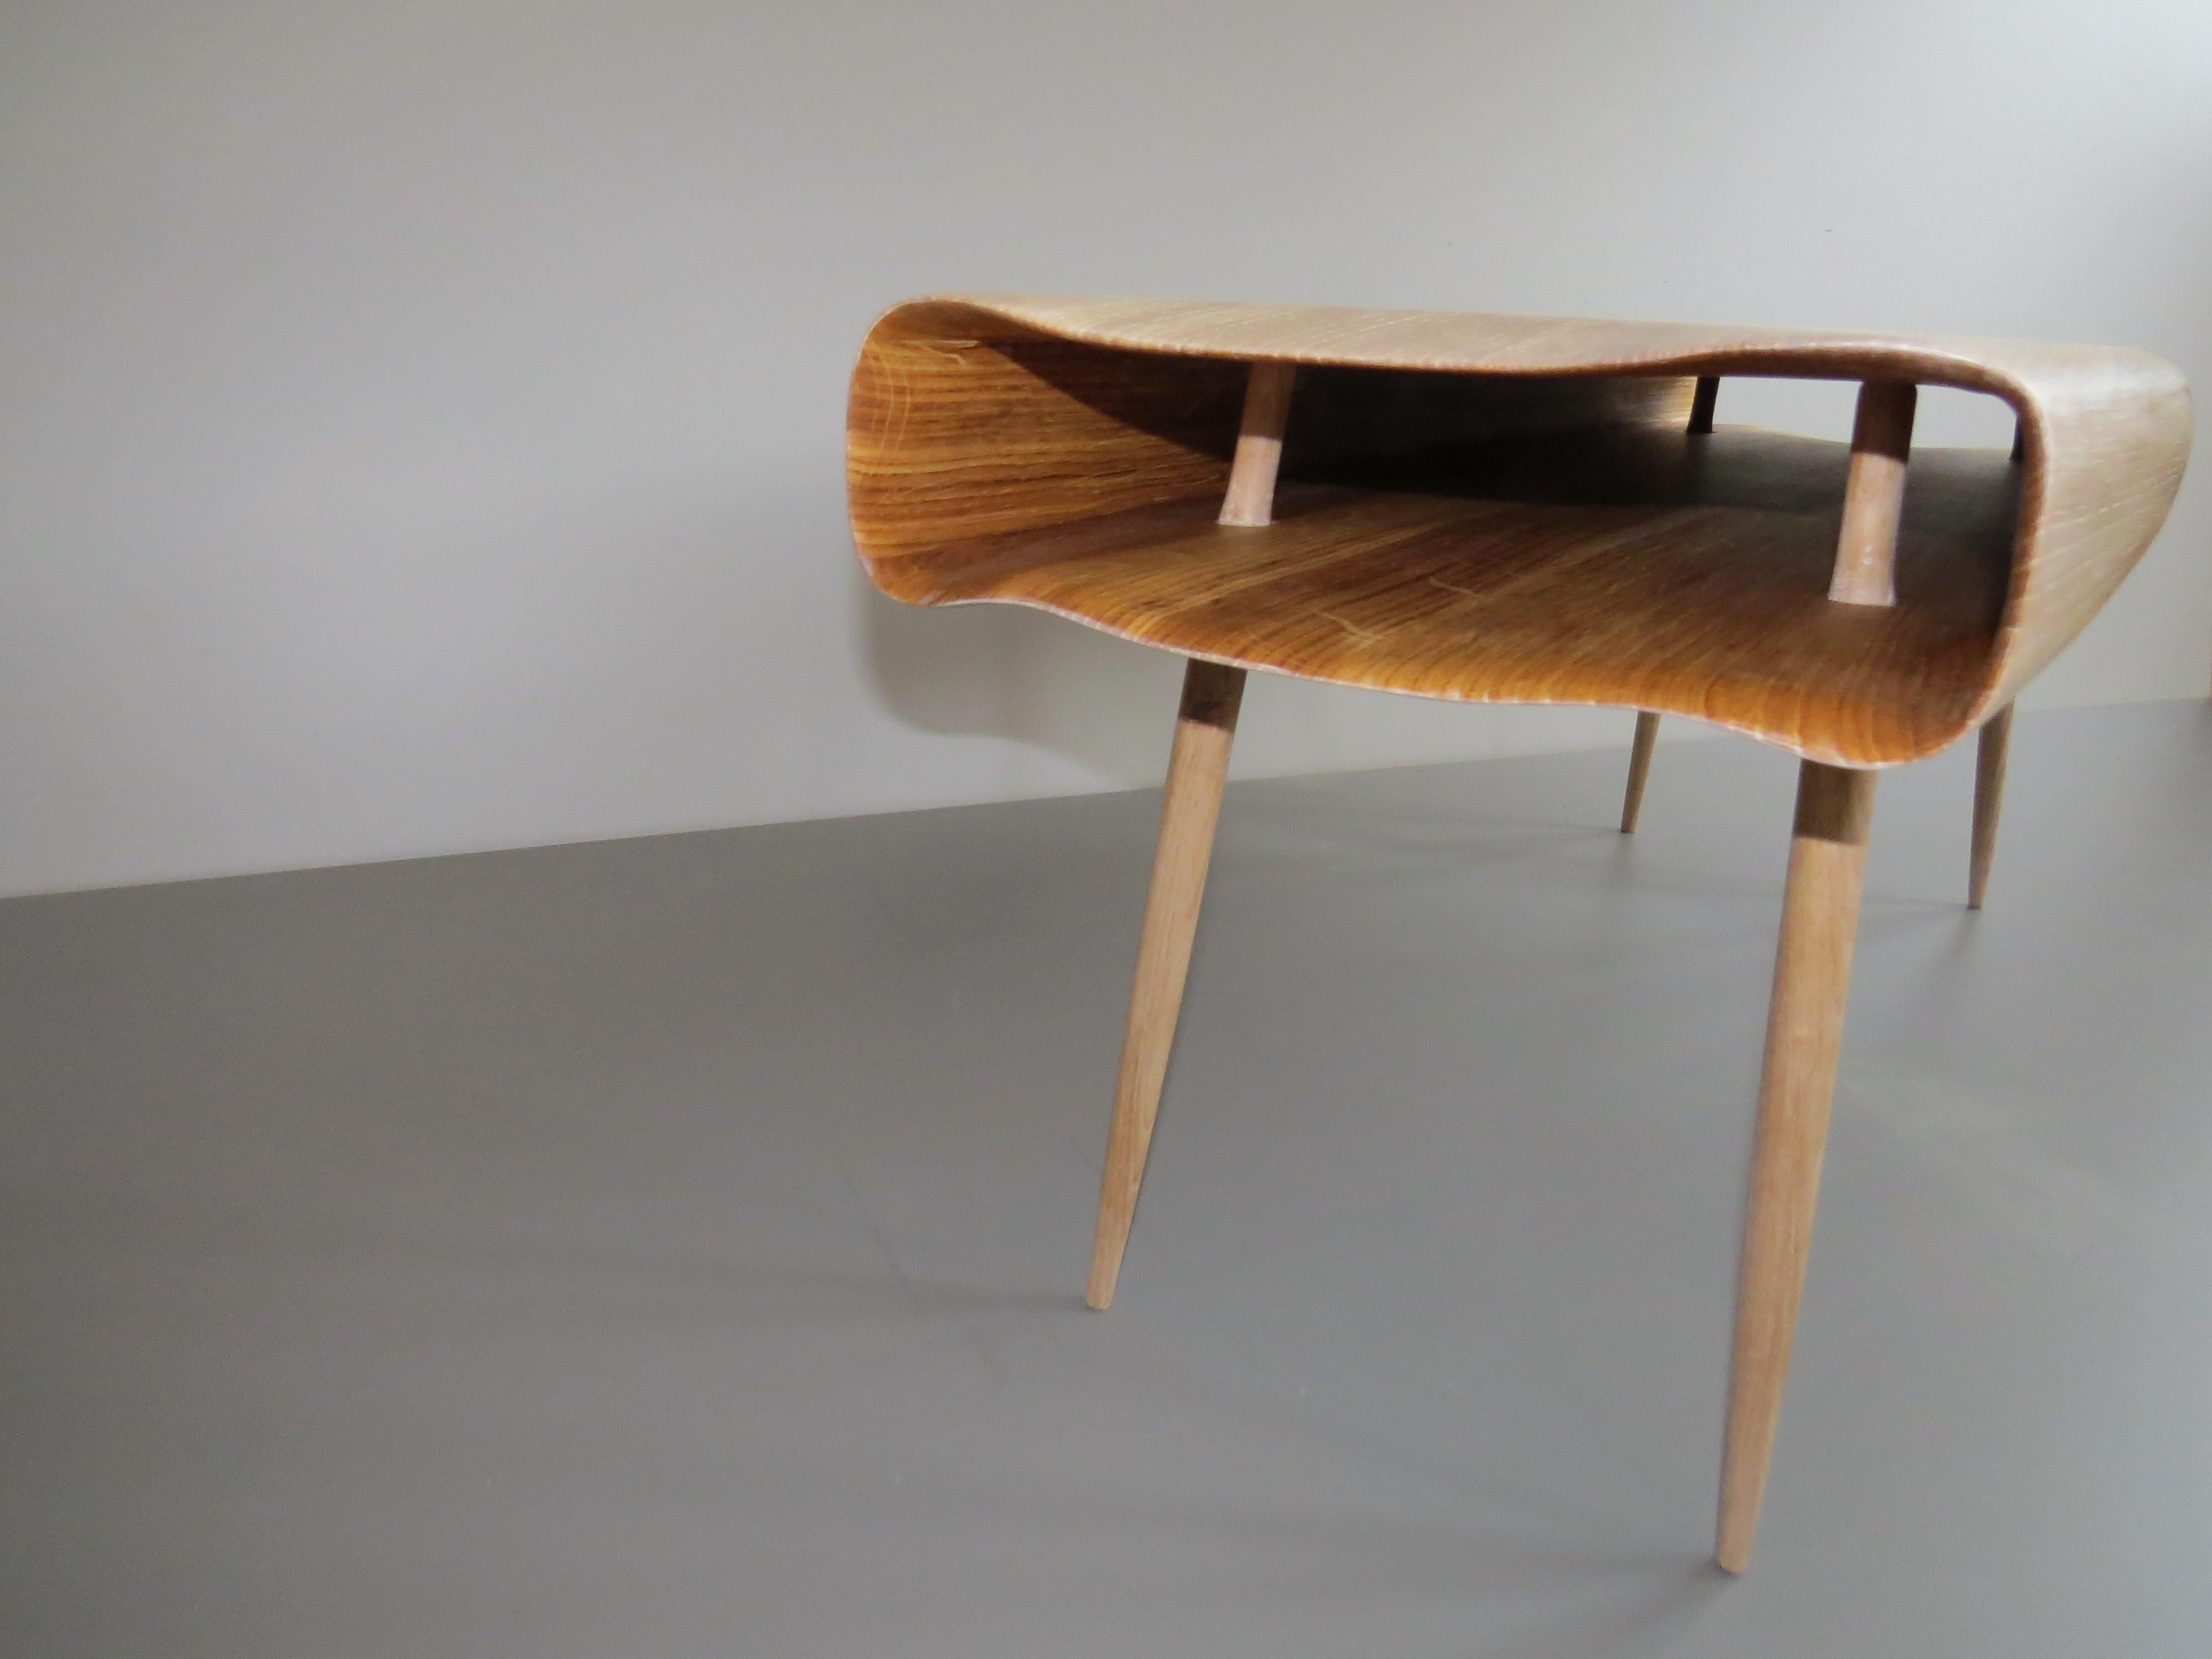 The furniture by the German furniture designer Eckehard Weimann seems to be alive.

Here as a bench: a hollow body made of solid wood serves as a seat object, it is organically delicately worked out -
by hand, of course!
The object appears soft in